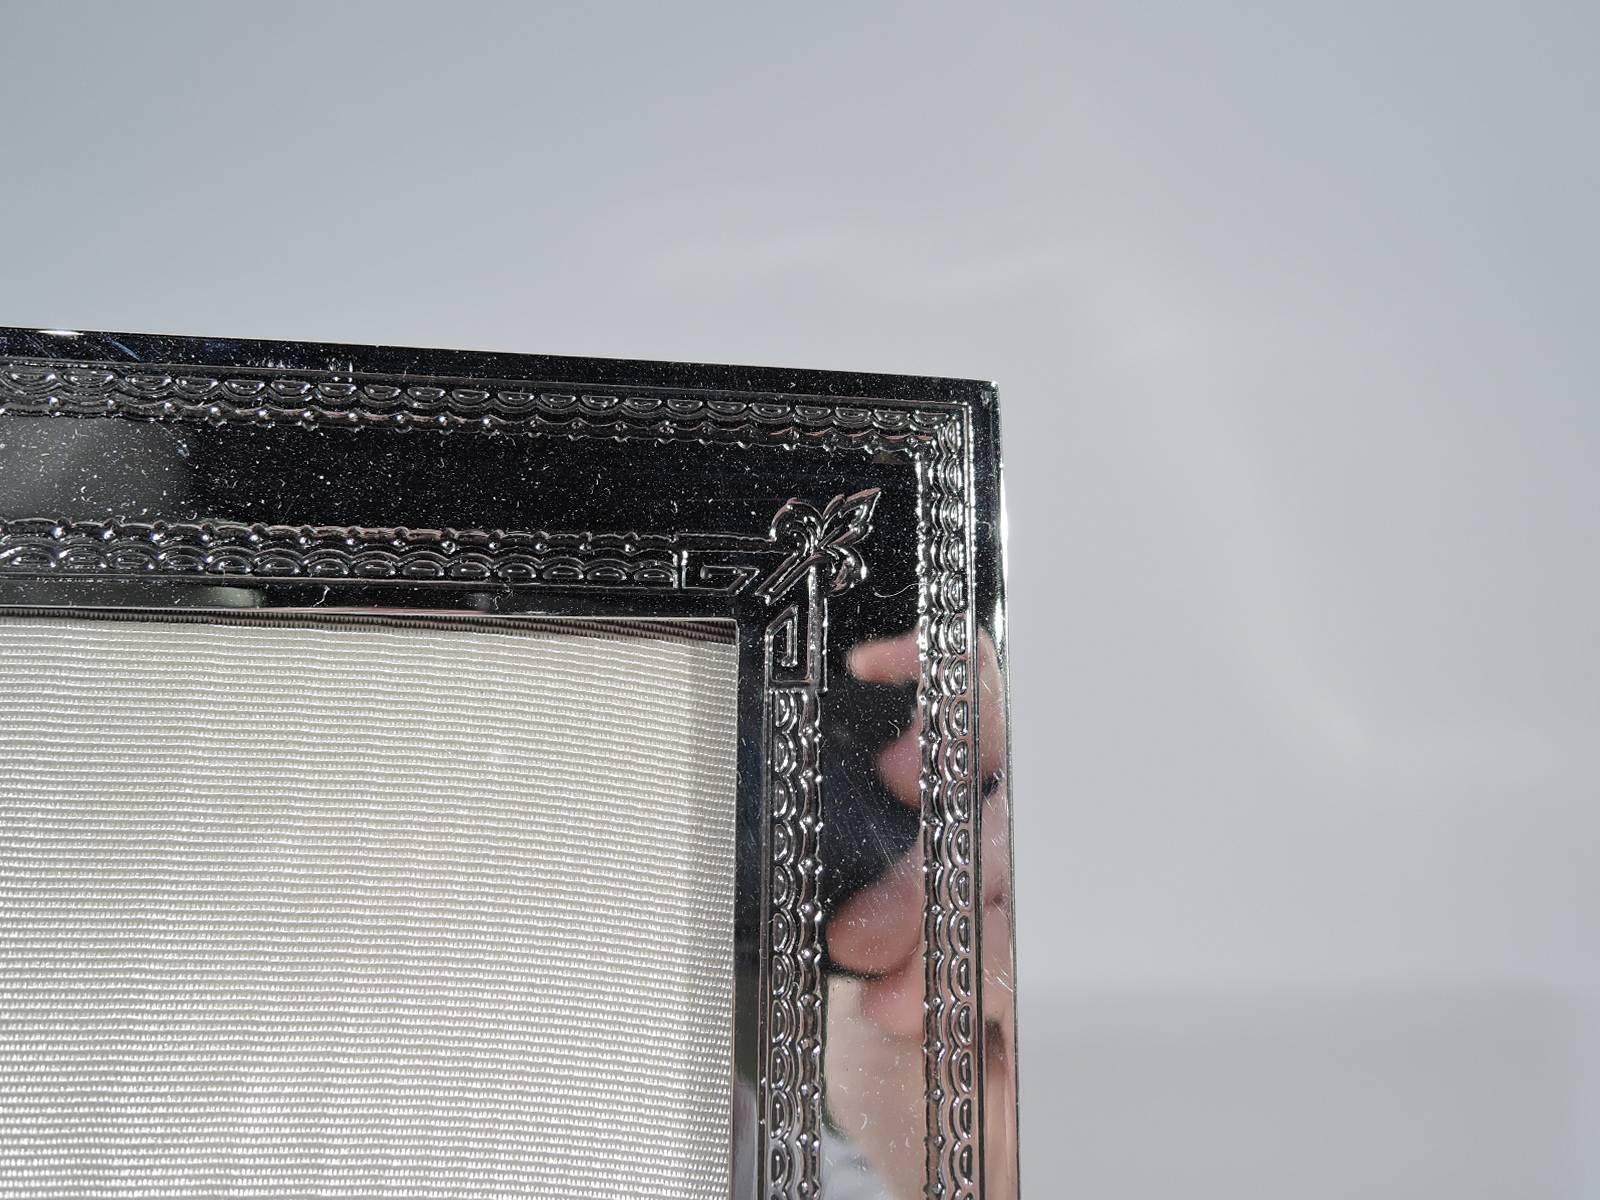 Edwardian sterling silver picture frame. Made by Eleder-Hickok (formerly Lebkuecher) in Newark, circa 1915. Rectangular with acid-etched ornamental borders and stylized flowers and leaves. Trapezoidal cartouche (vacant). With glass, silk lining and